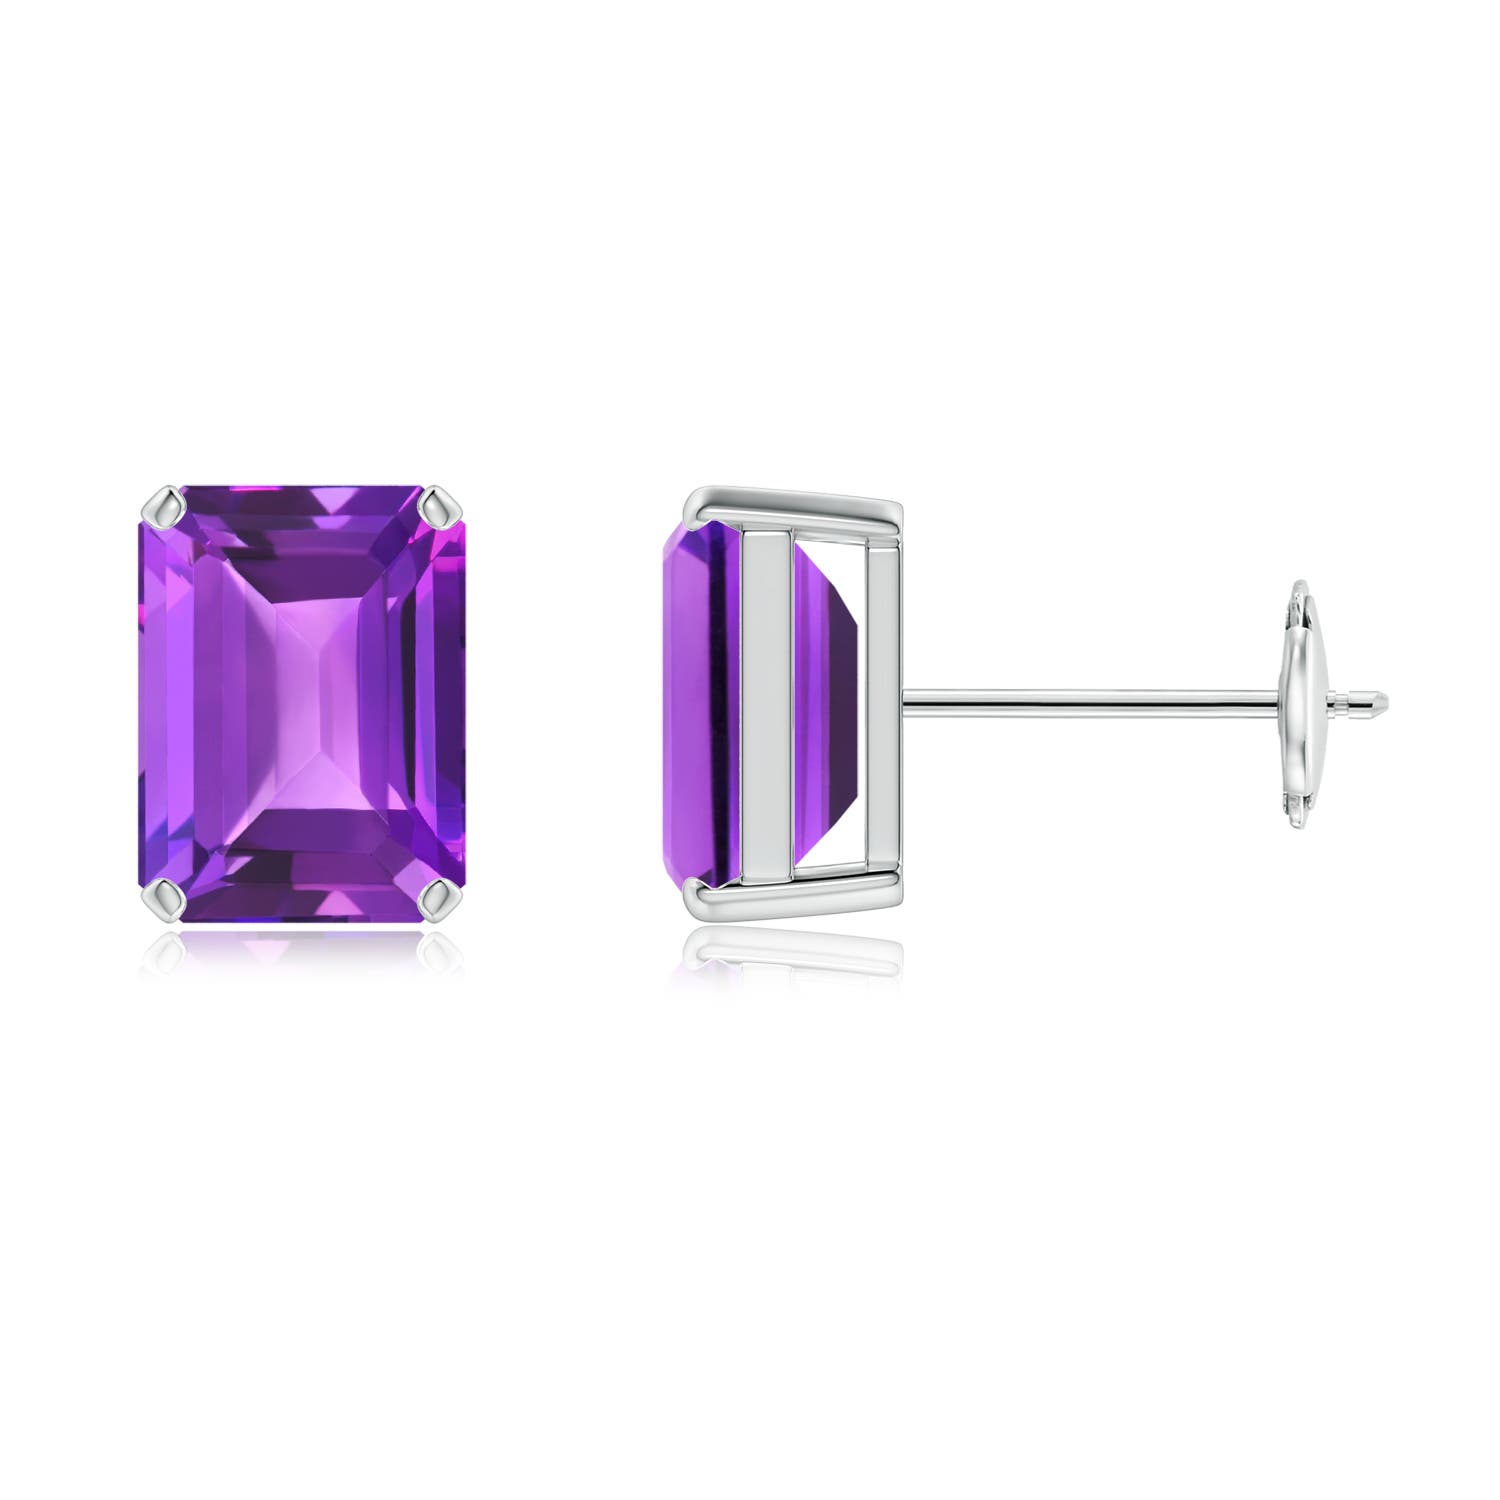 AAA - Amethyst / 3 CT / 14 KT White Gold